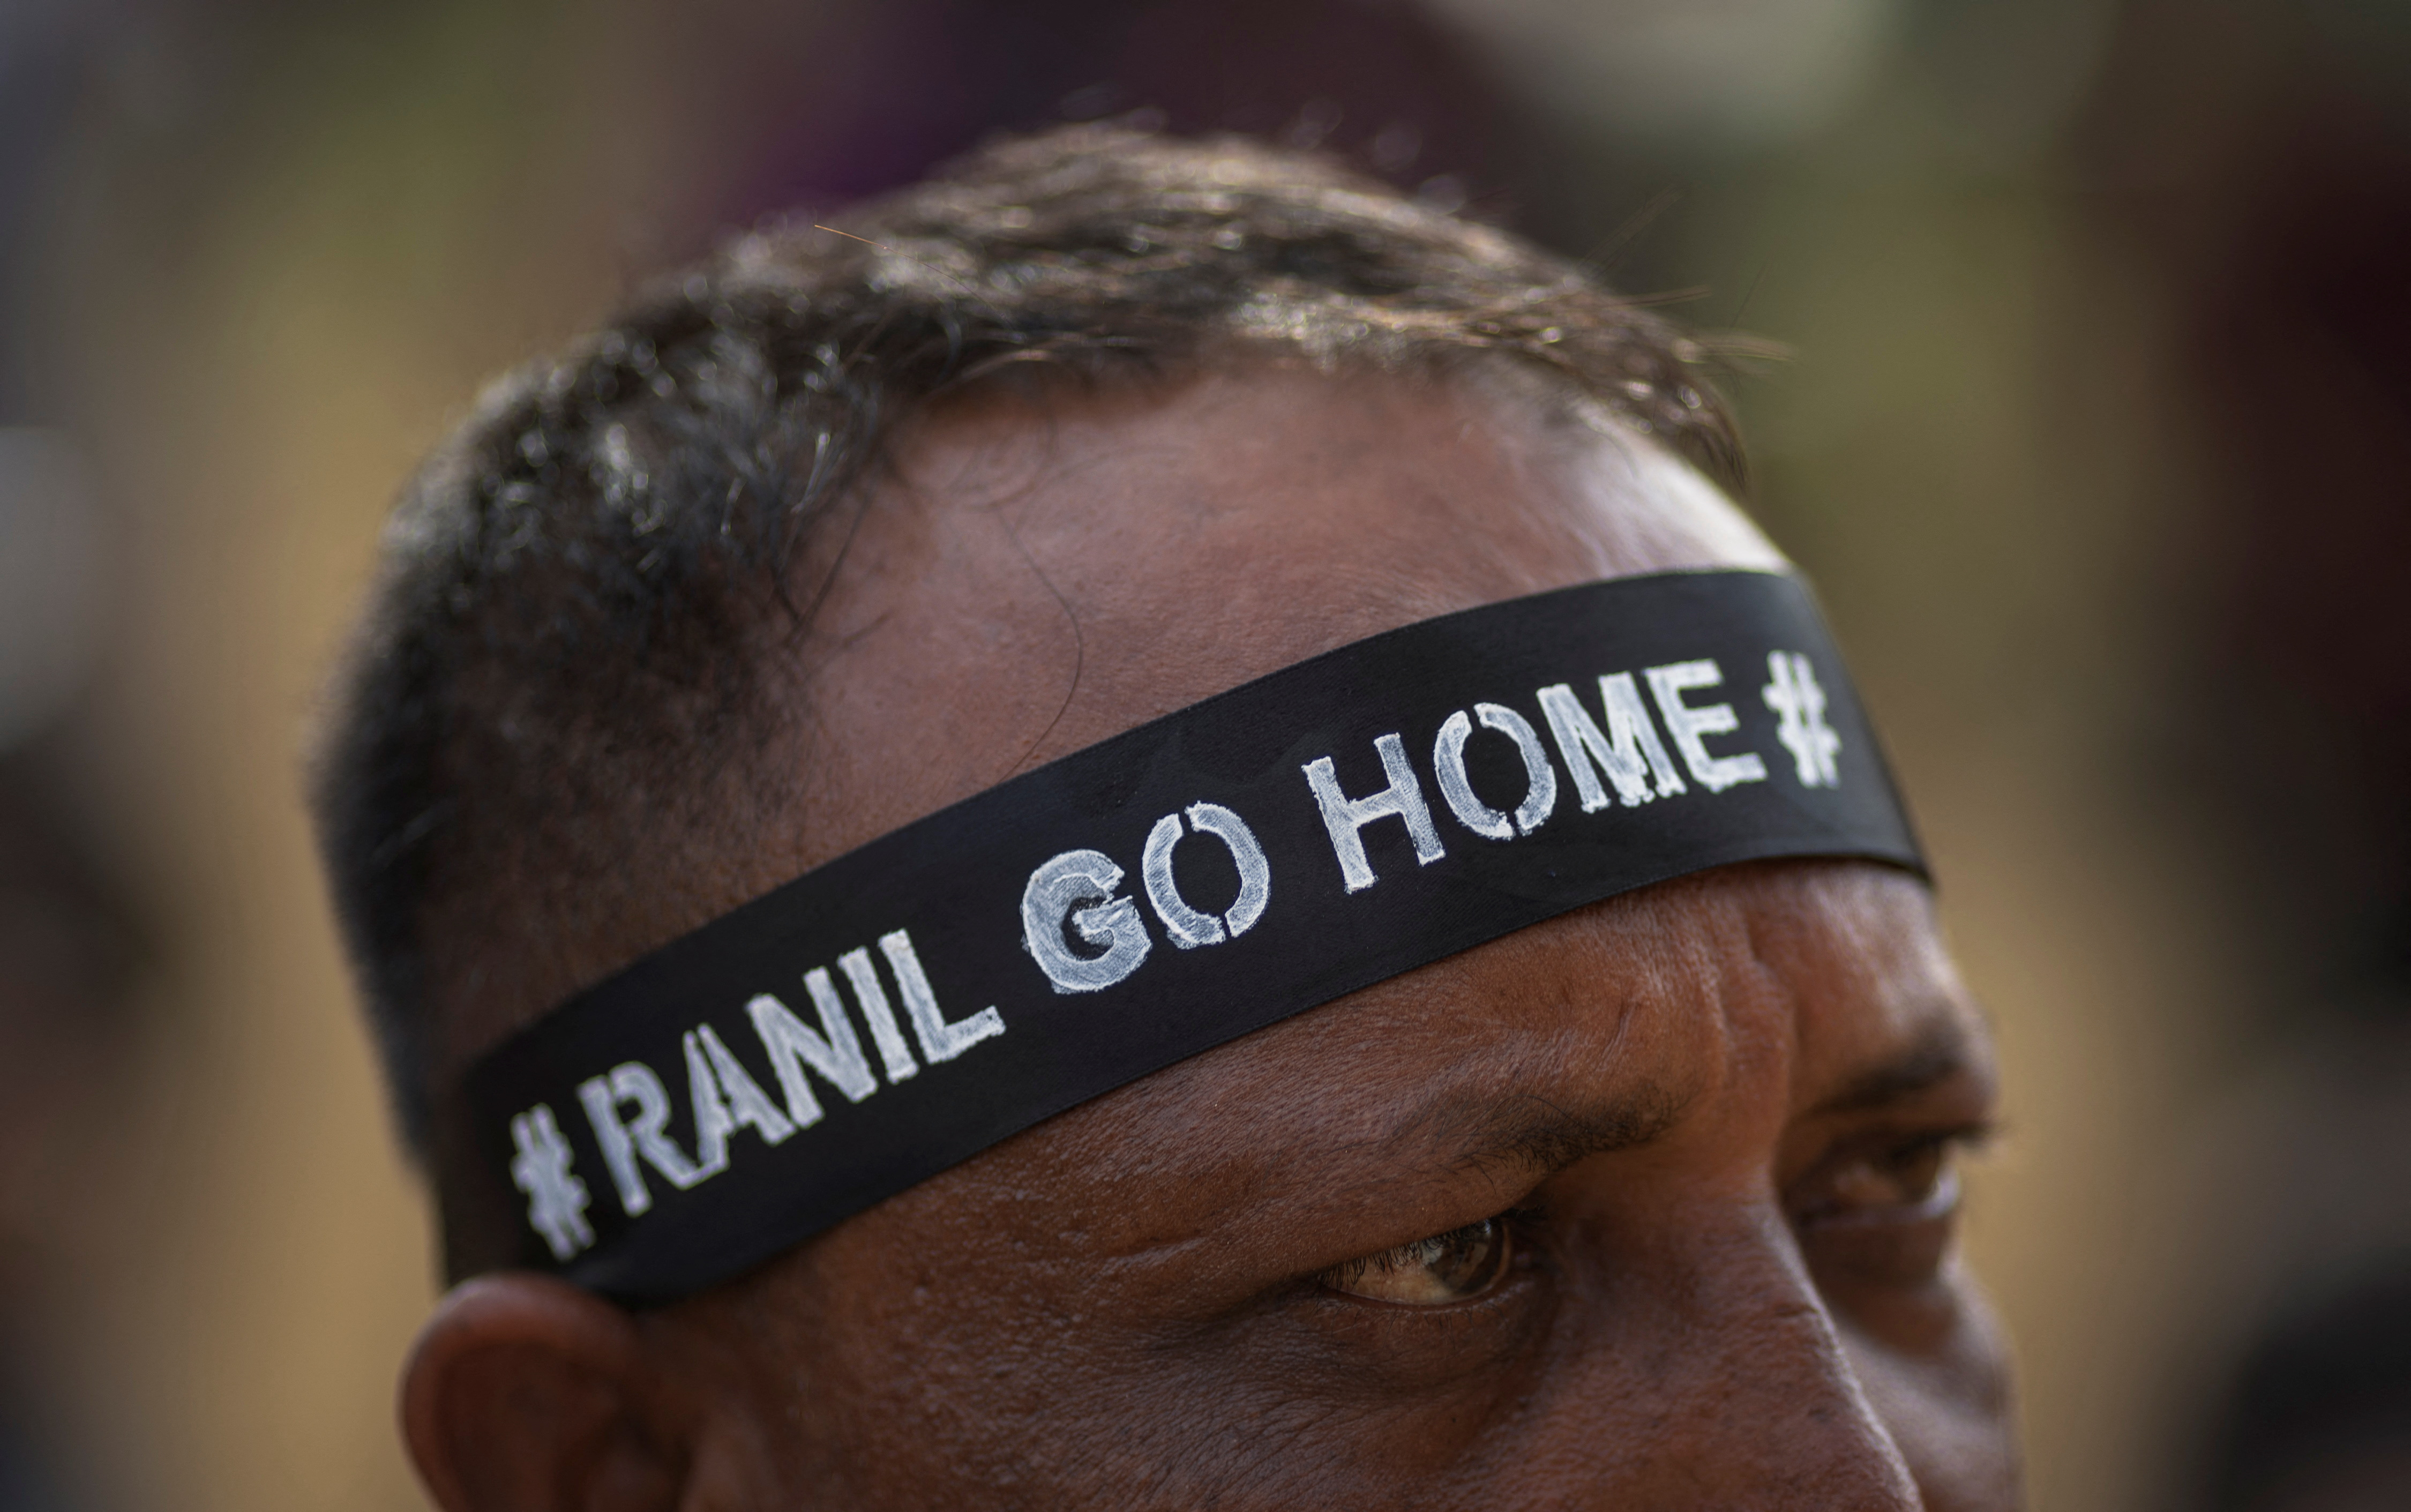 Protestors attend a protest against Sri Lanka's newly elected President Ranil Wickremesinghe, in Colombo